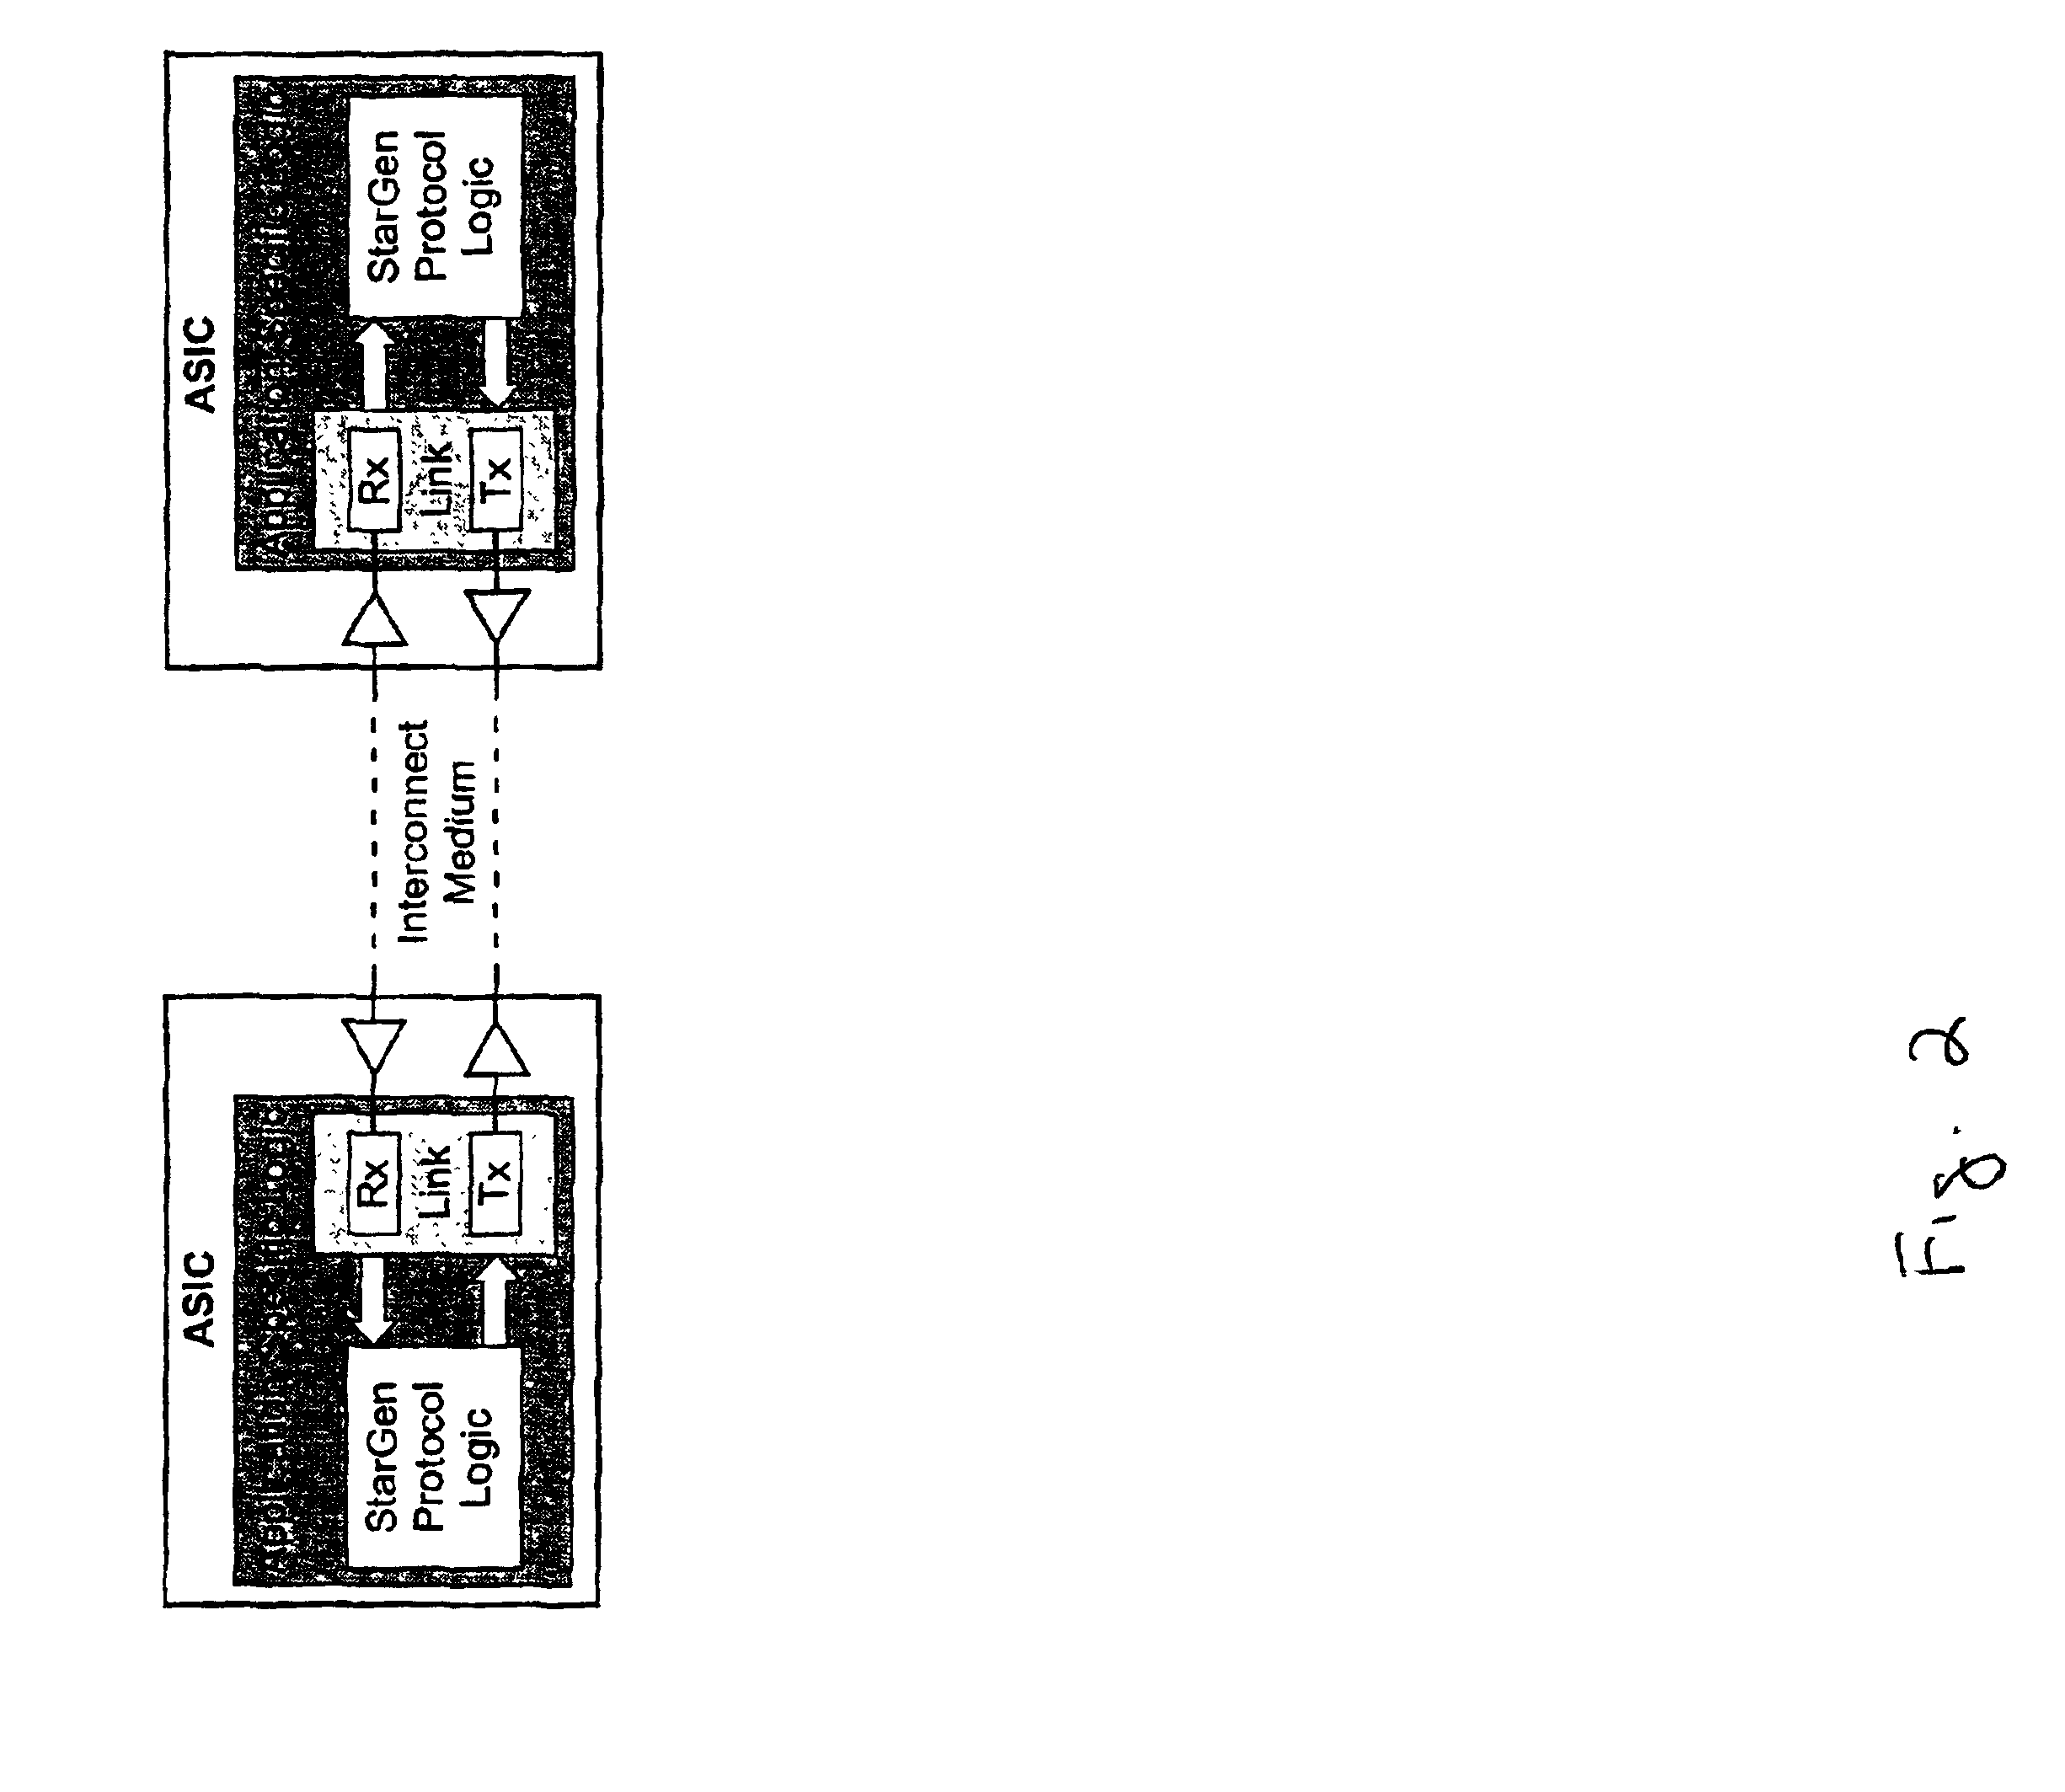 Multi-port system and method for routing a data element within an interconnection fabric